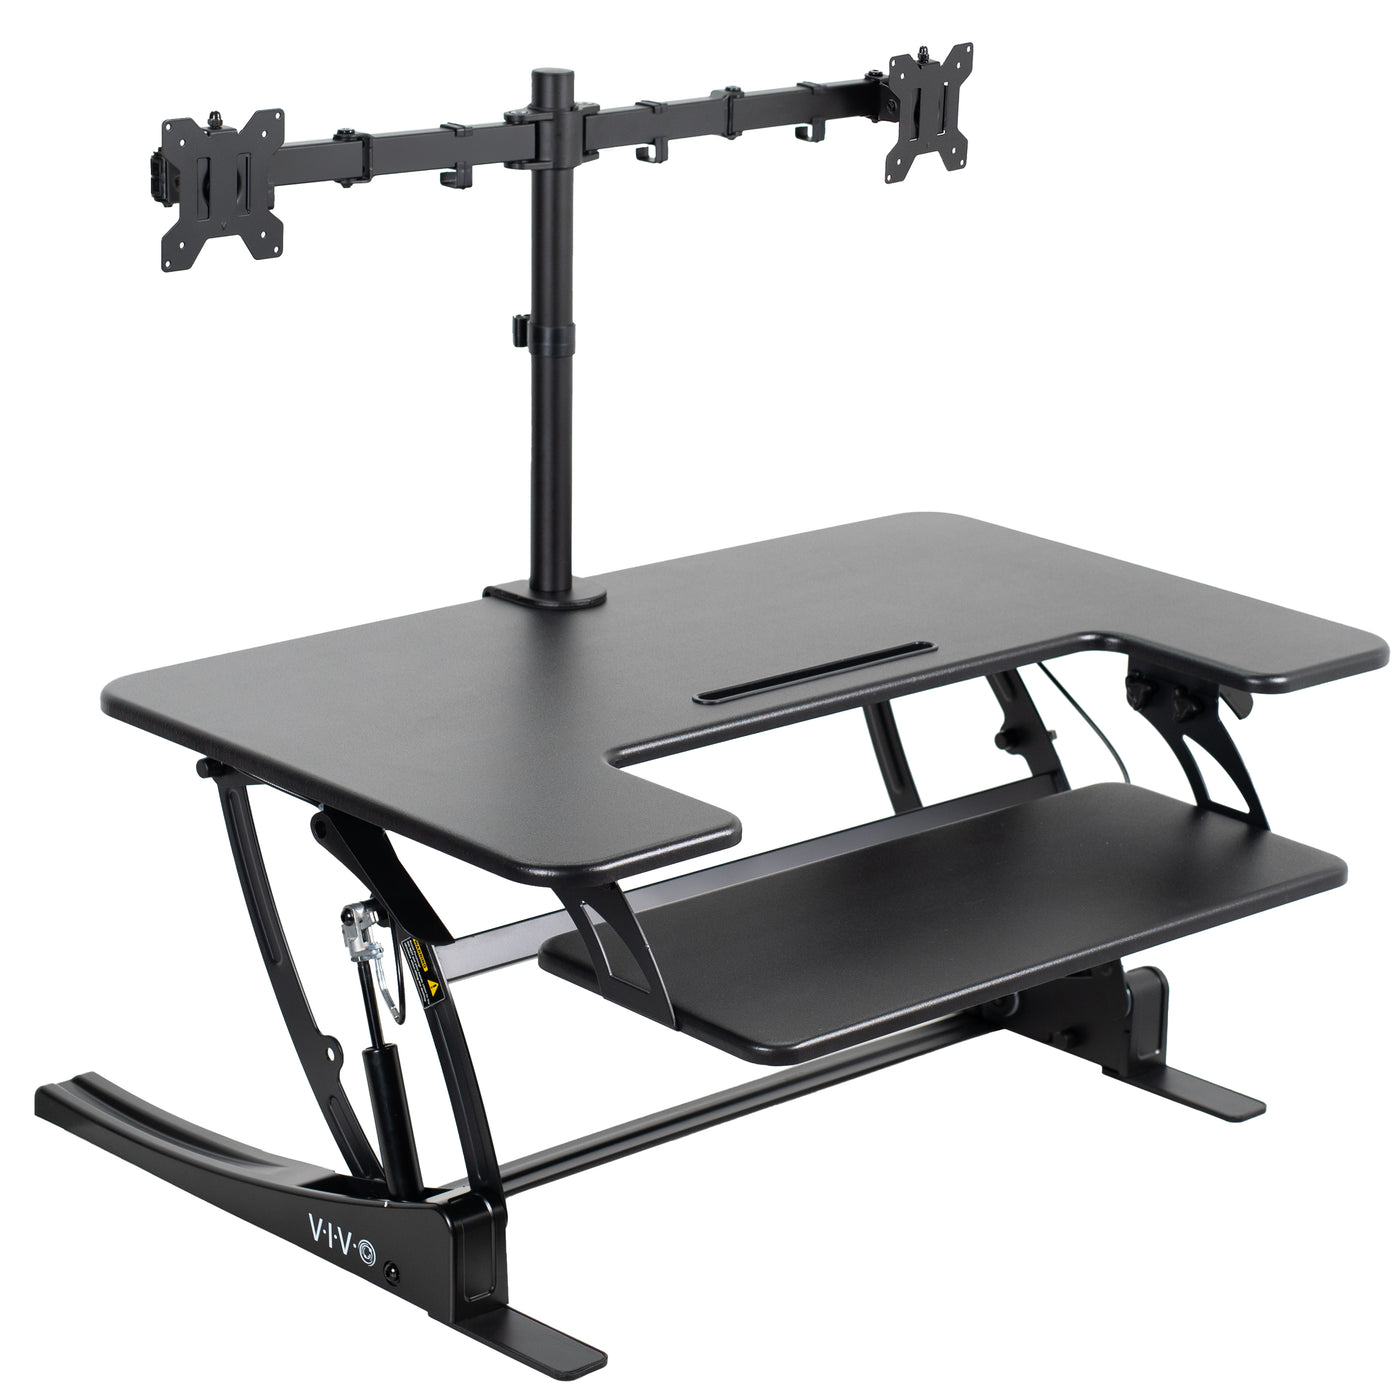 Height adjustable desk riser with articulating dual monitor mount.